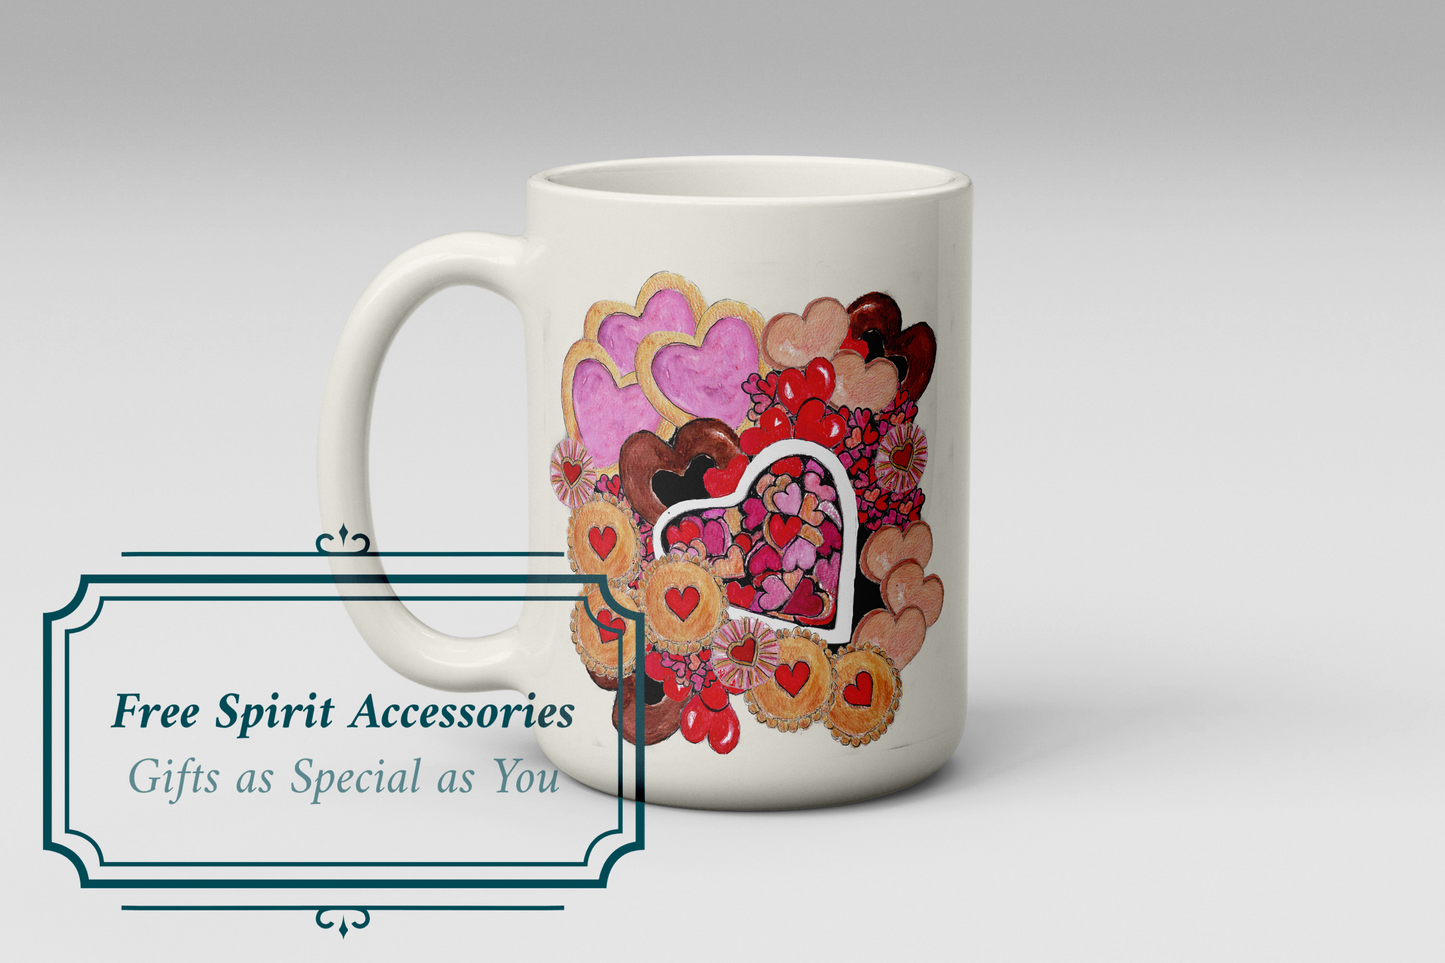  Biscuits and Hearts Coffee Mug by Free Spirit Accessories sold by Free Spirit Accessories